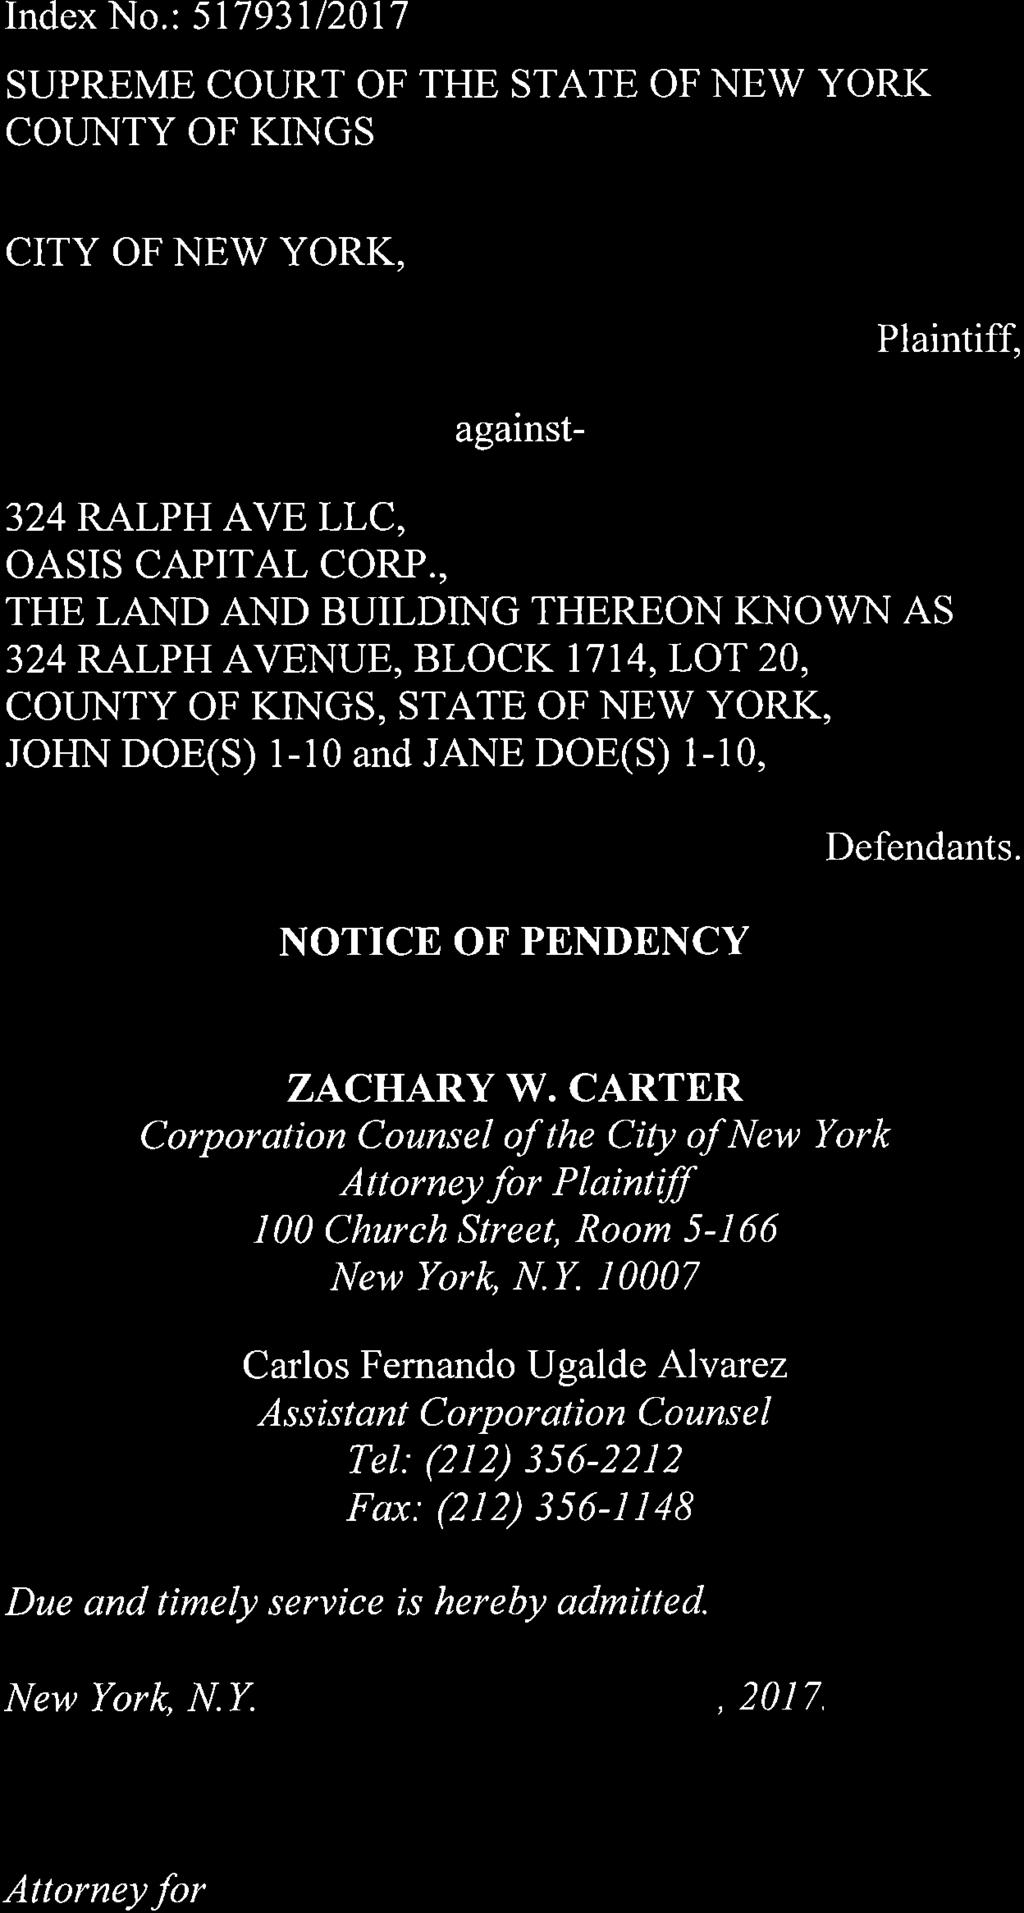 Index No.: 51193112017 SUPREME COURT OF THE STATE OF NEW YORK COLTNTY OF KINGS CITY OF NEV/ YORK, against- Plaintiff, 324 RALPH AVE LLC, OASIS CAPITAL CORP.